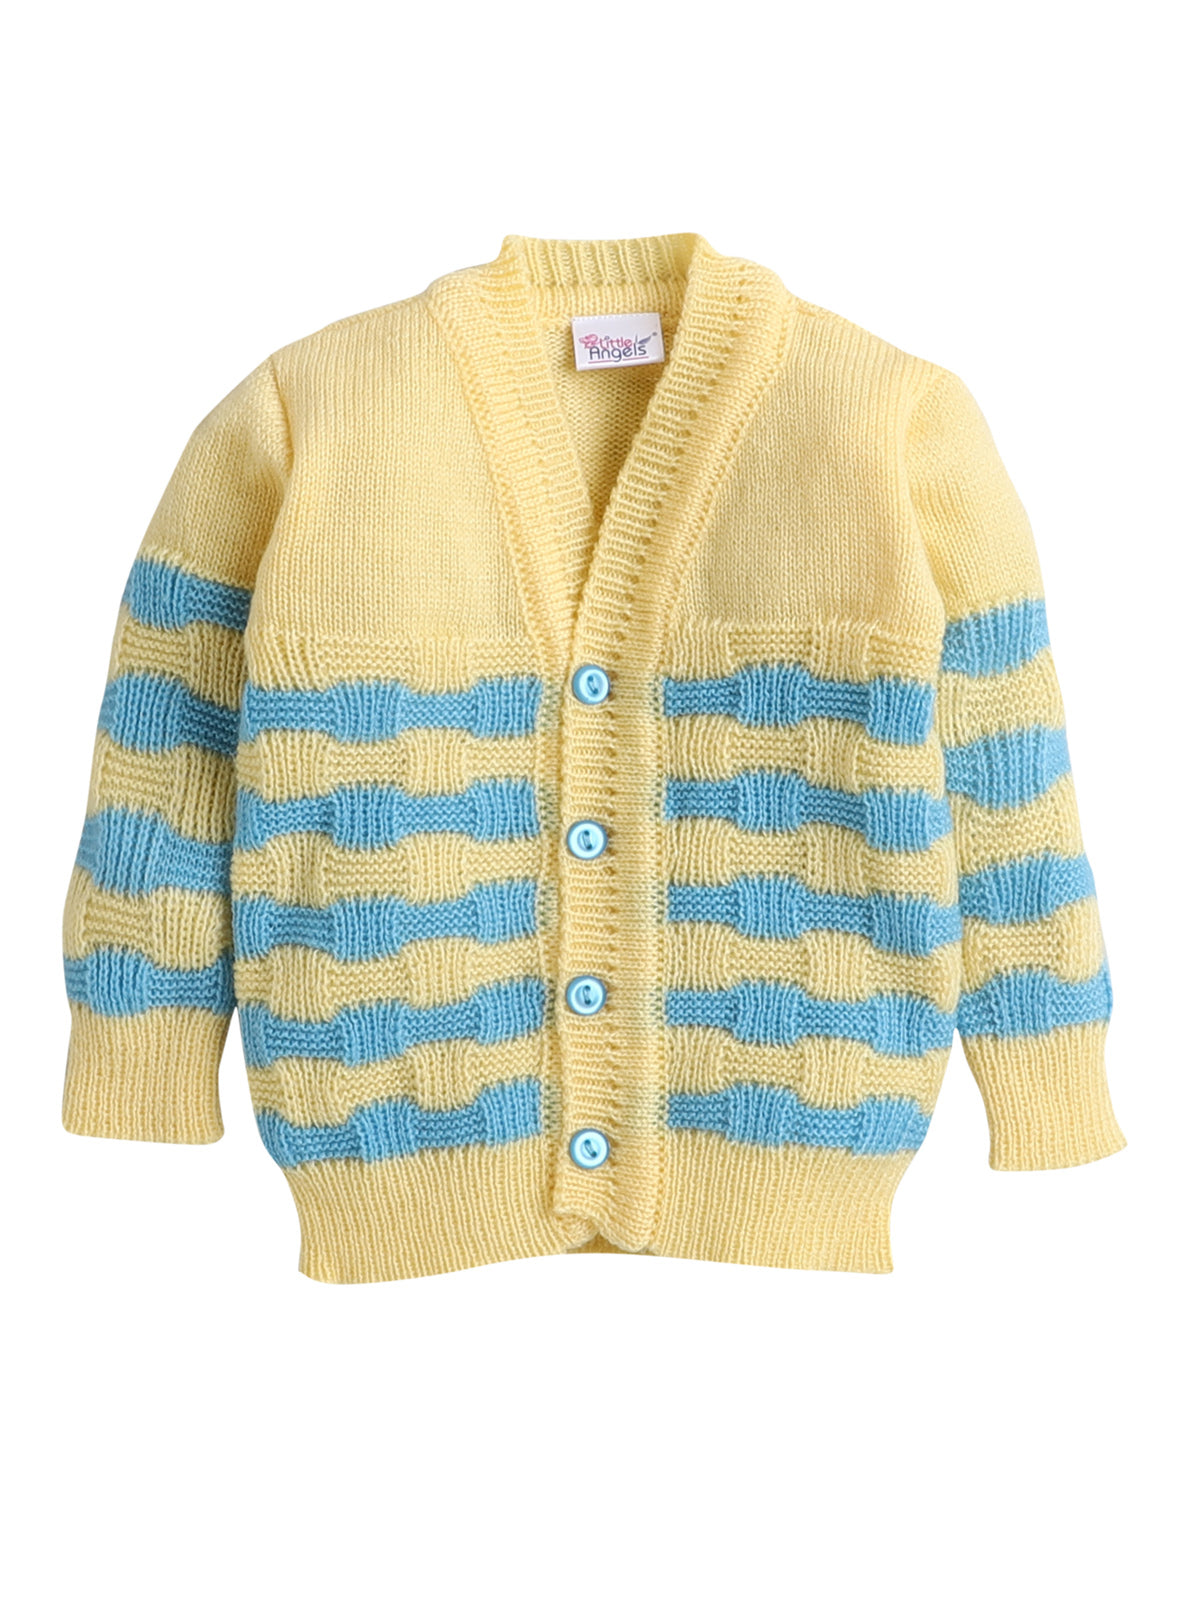 Full sleeves front open yellow with blue stripe  color sweater with matching cap and socks for baby